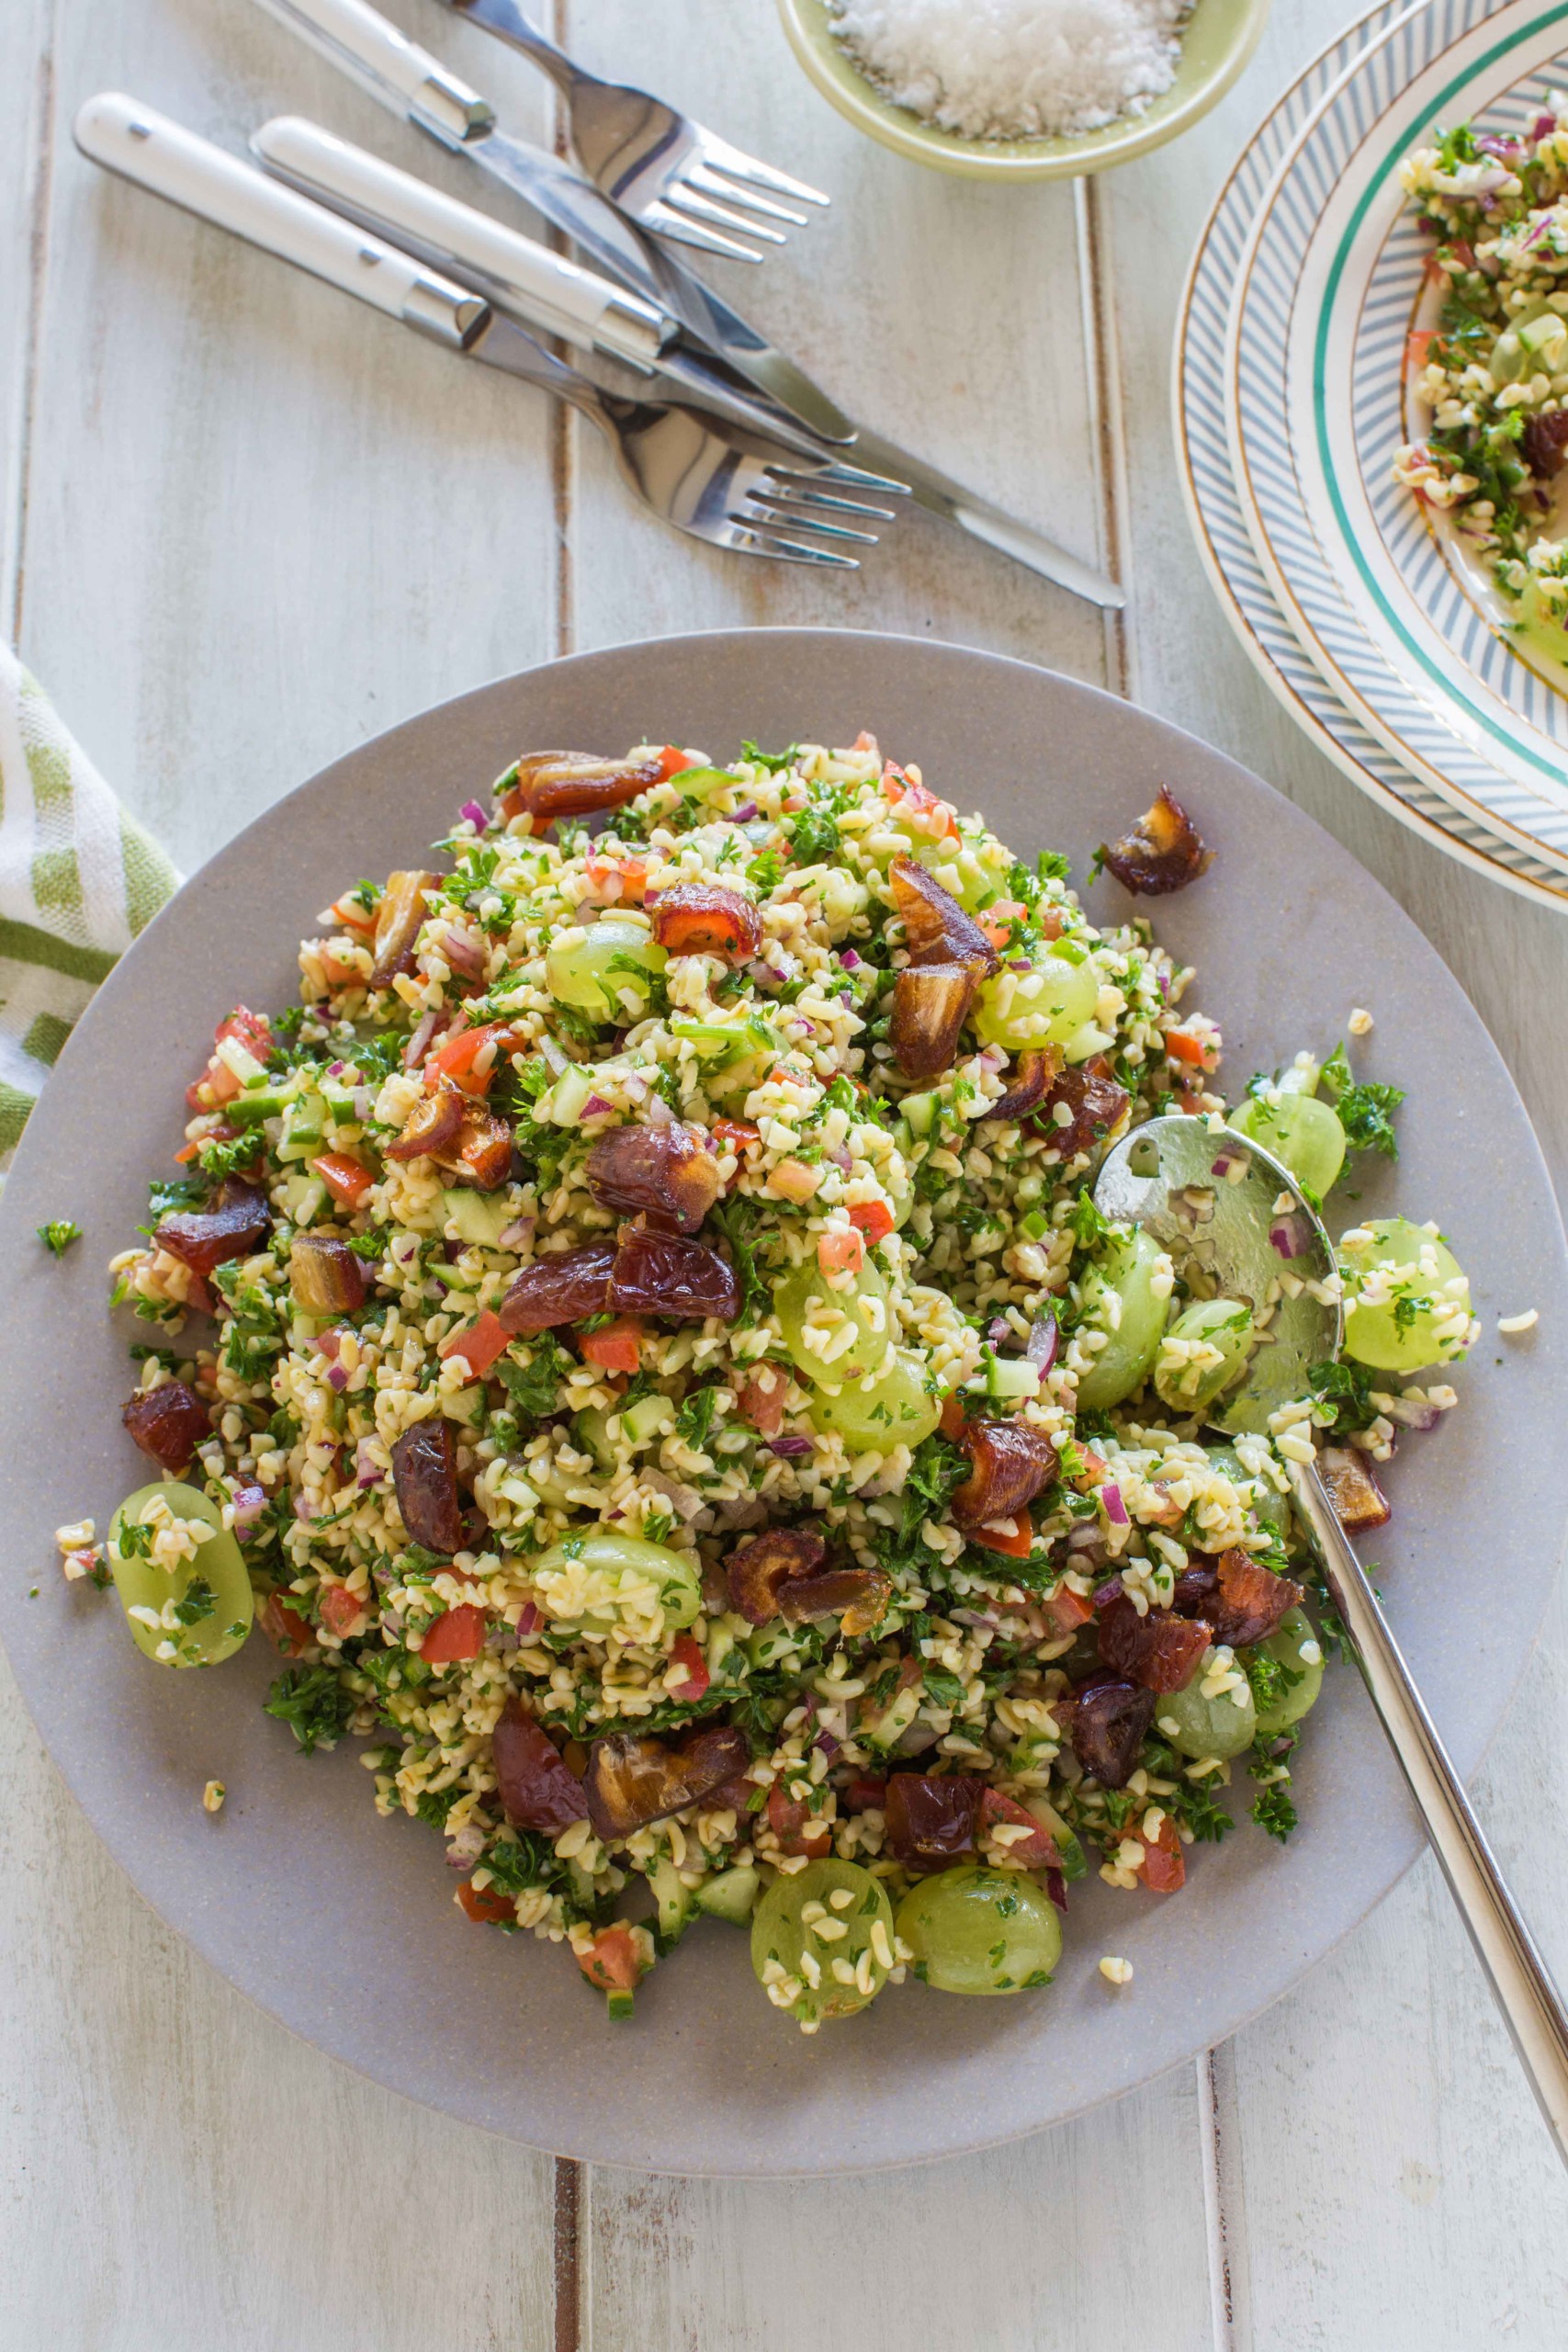 Tabouleh Salad with Parsley, Dates and Grapes - Nadia Lim